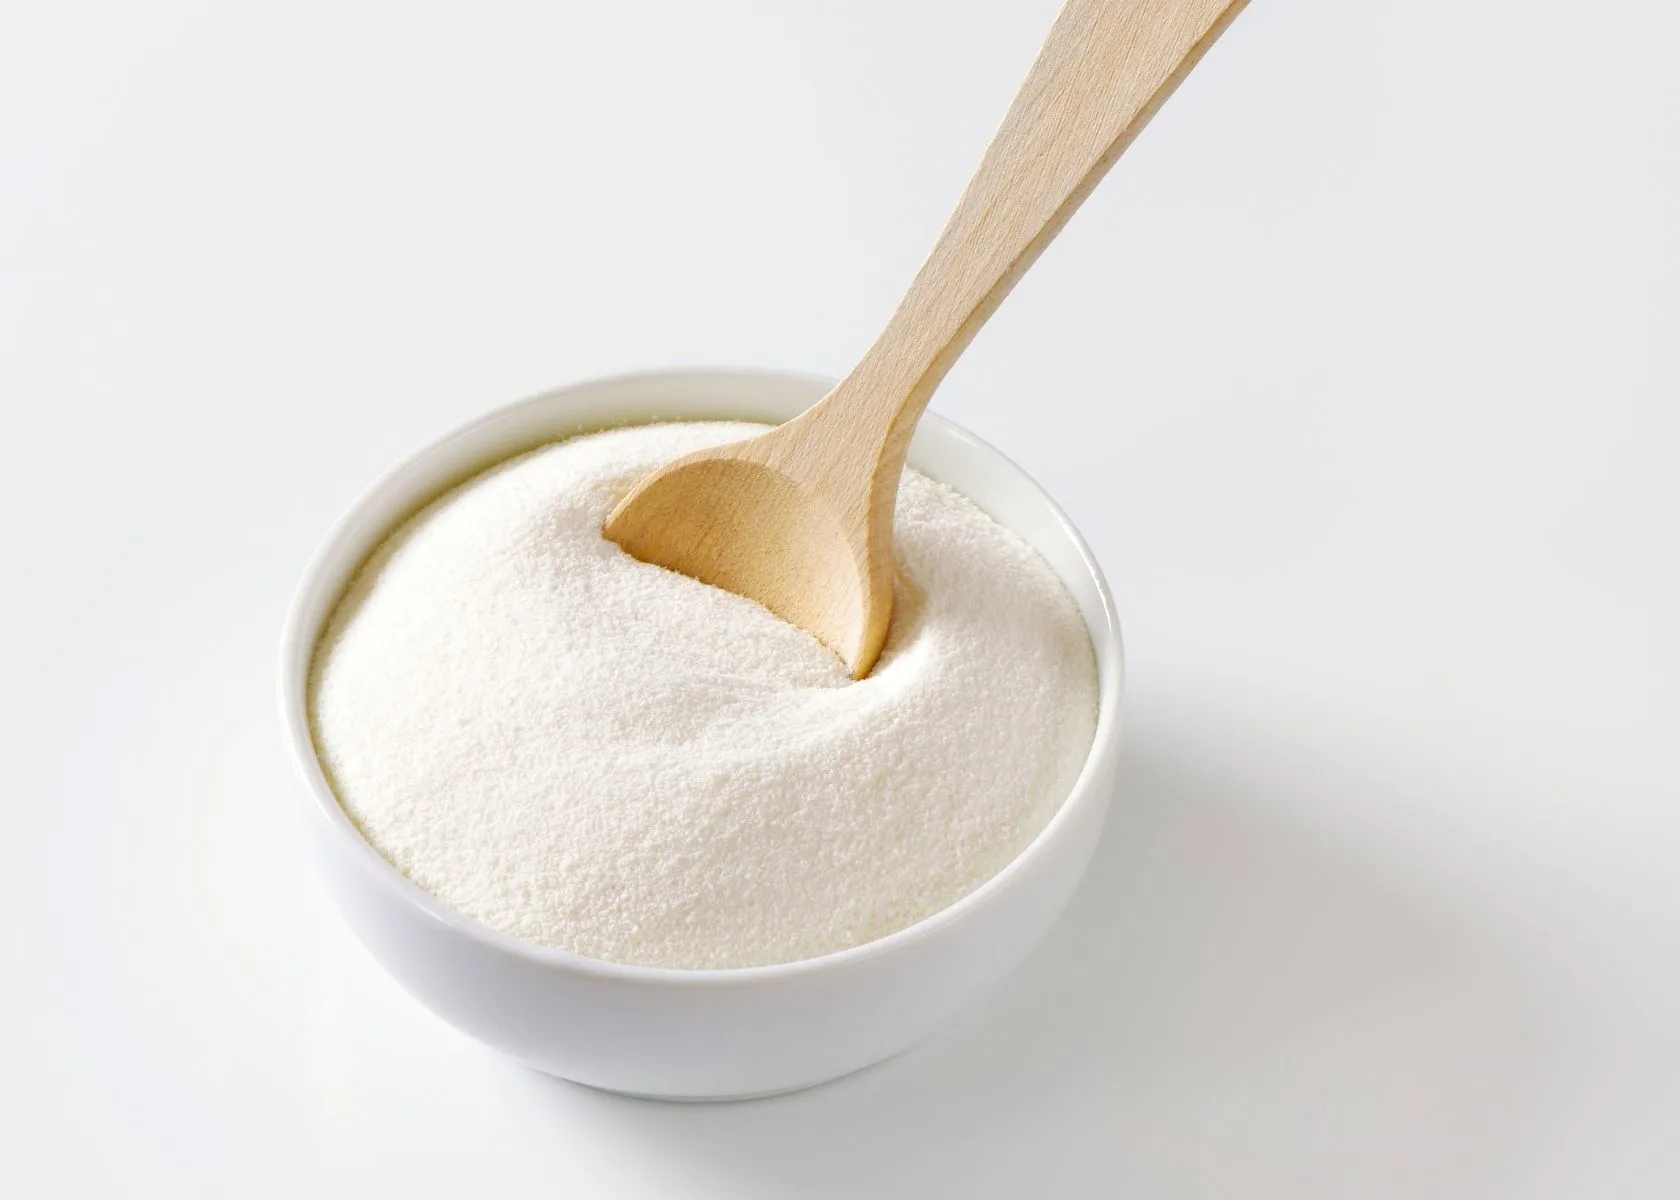 Large mound of xanthan gum powder in white bowl with wooden spoon.